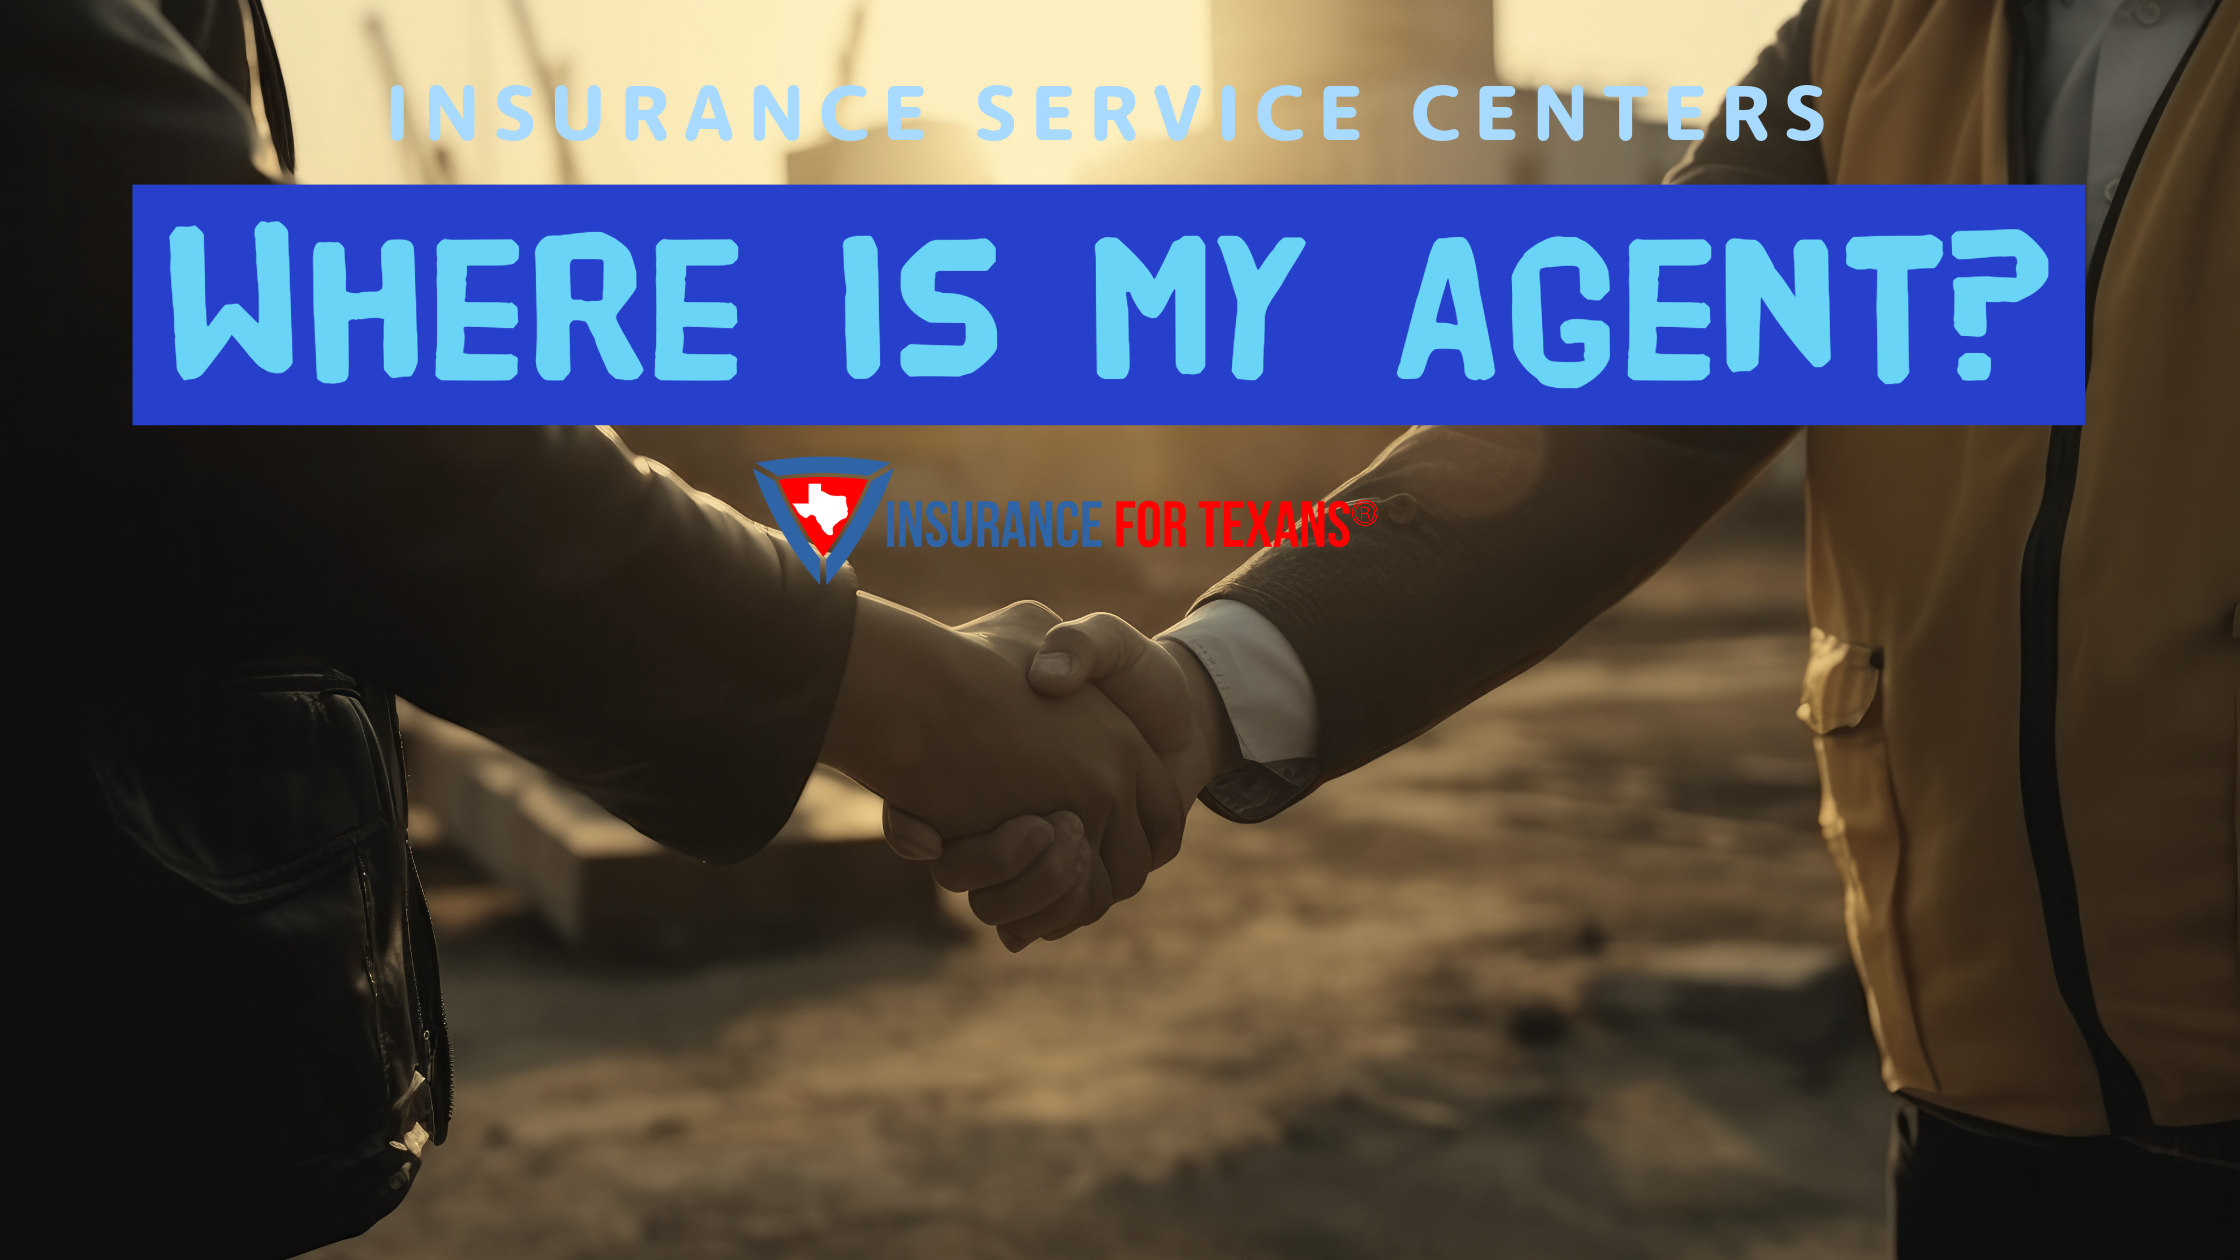 Insurance Carrier Service Centers: Where is my Agent?